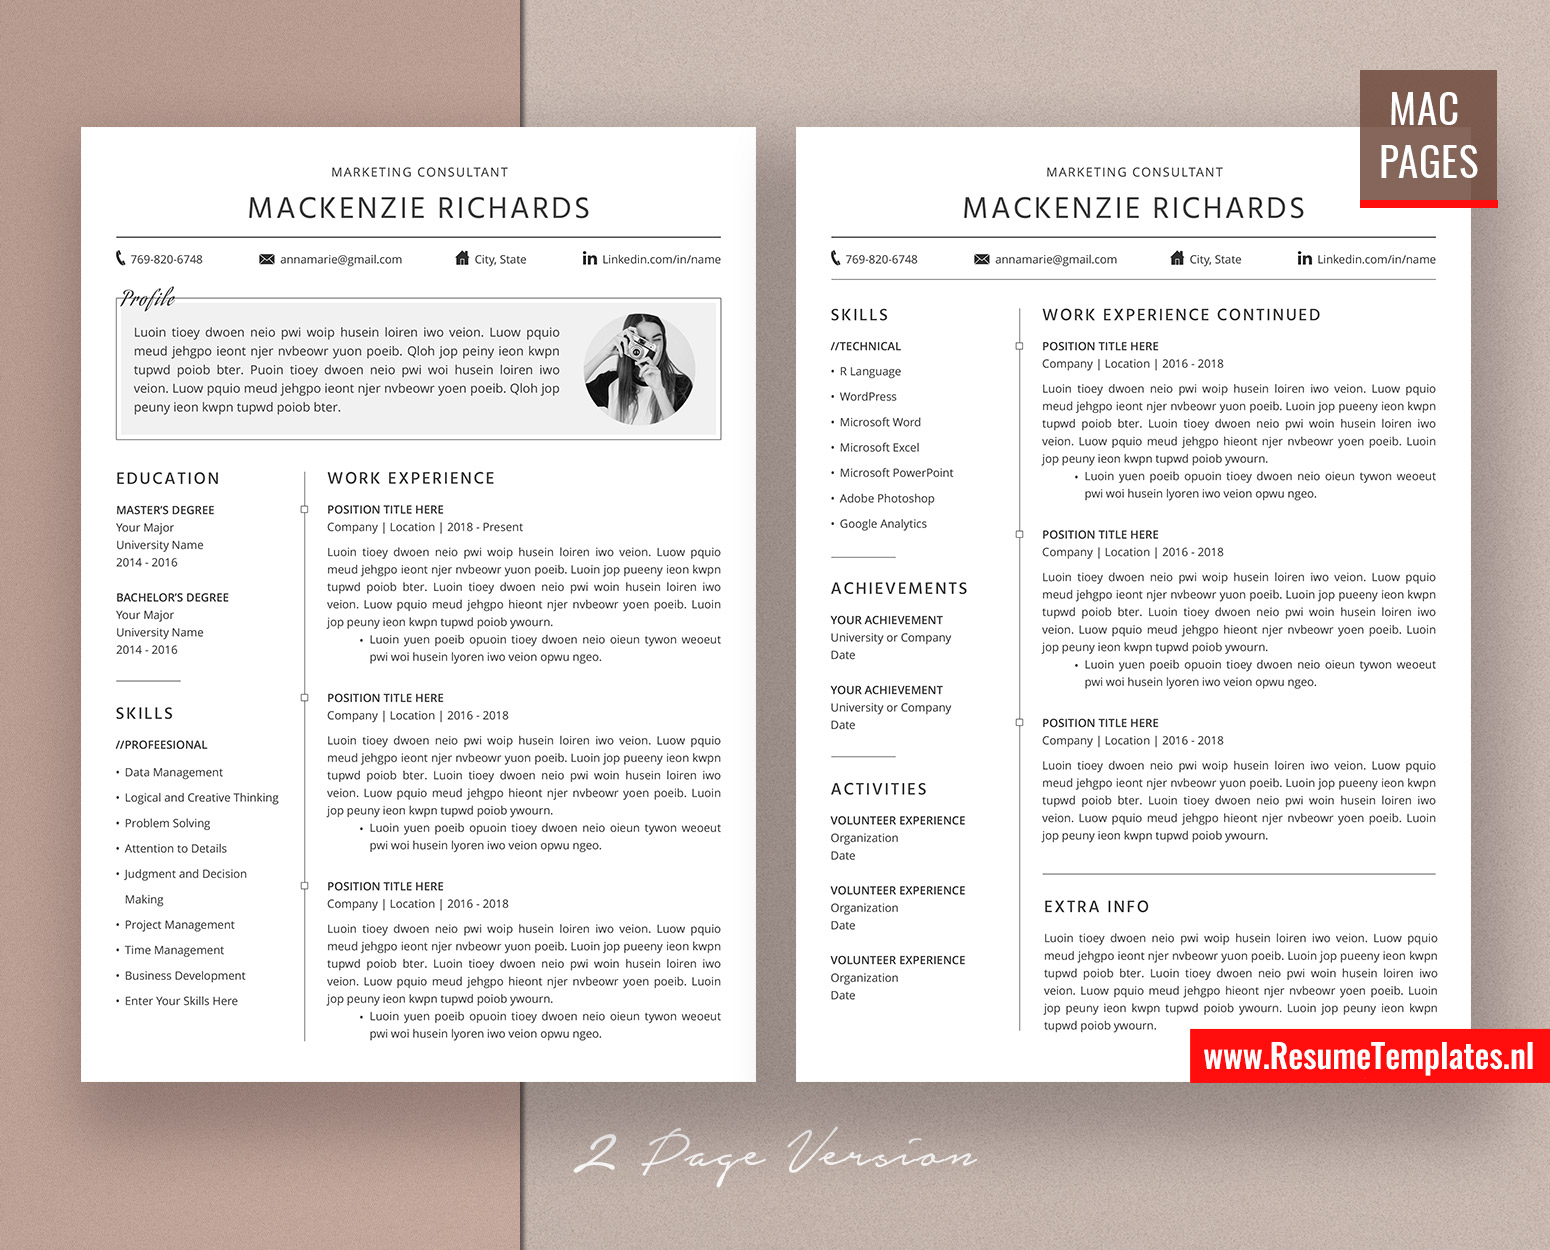 mac pages templates free download